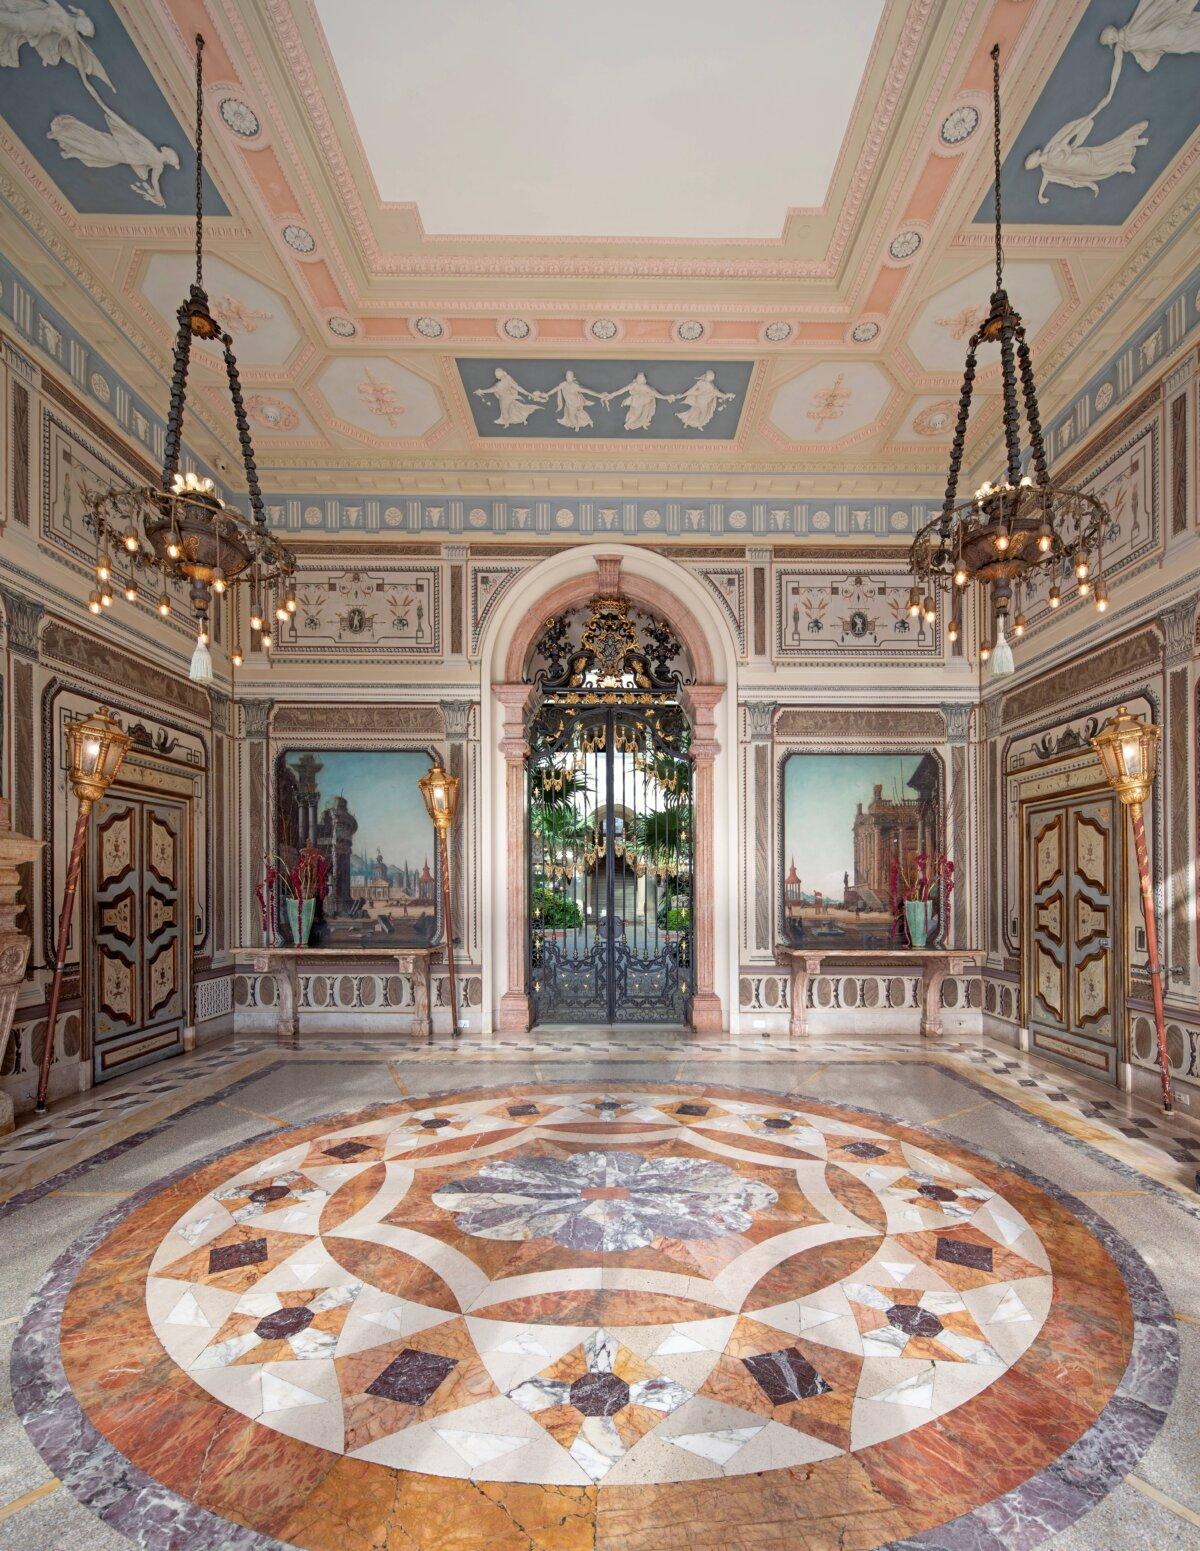 Craftsmanship and design adorn every square inch of space of the loggia (a covered exterior entrance), from the floor, to the walls made of ornamental wood and plaster, to the ceiling. The floor is inlaid with varicolored marble and terrazzo. The ceiling moldings are Wedgewood-inspired. Around the walls is a 15-panel canvas installation from the 18th century that depicts the conquest of Troy. The circa 17th-century gate was originally at the home of a diplomat in Venice, Italy. (Robin Hill/Vizcaya Museum and Gardens)